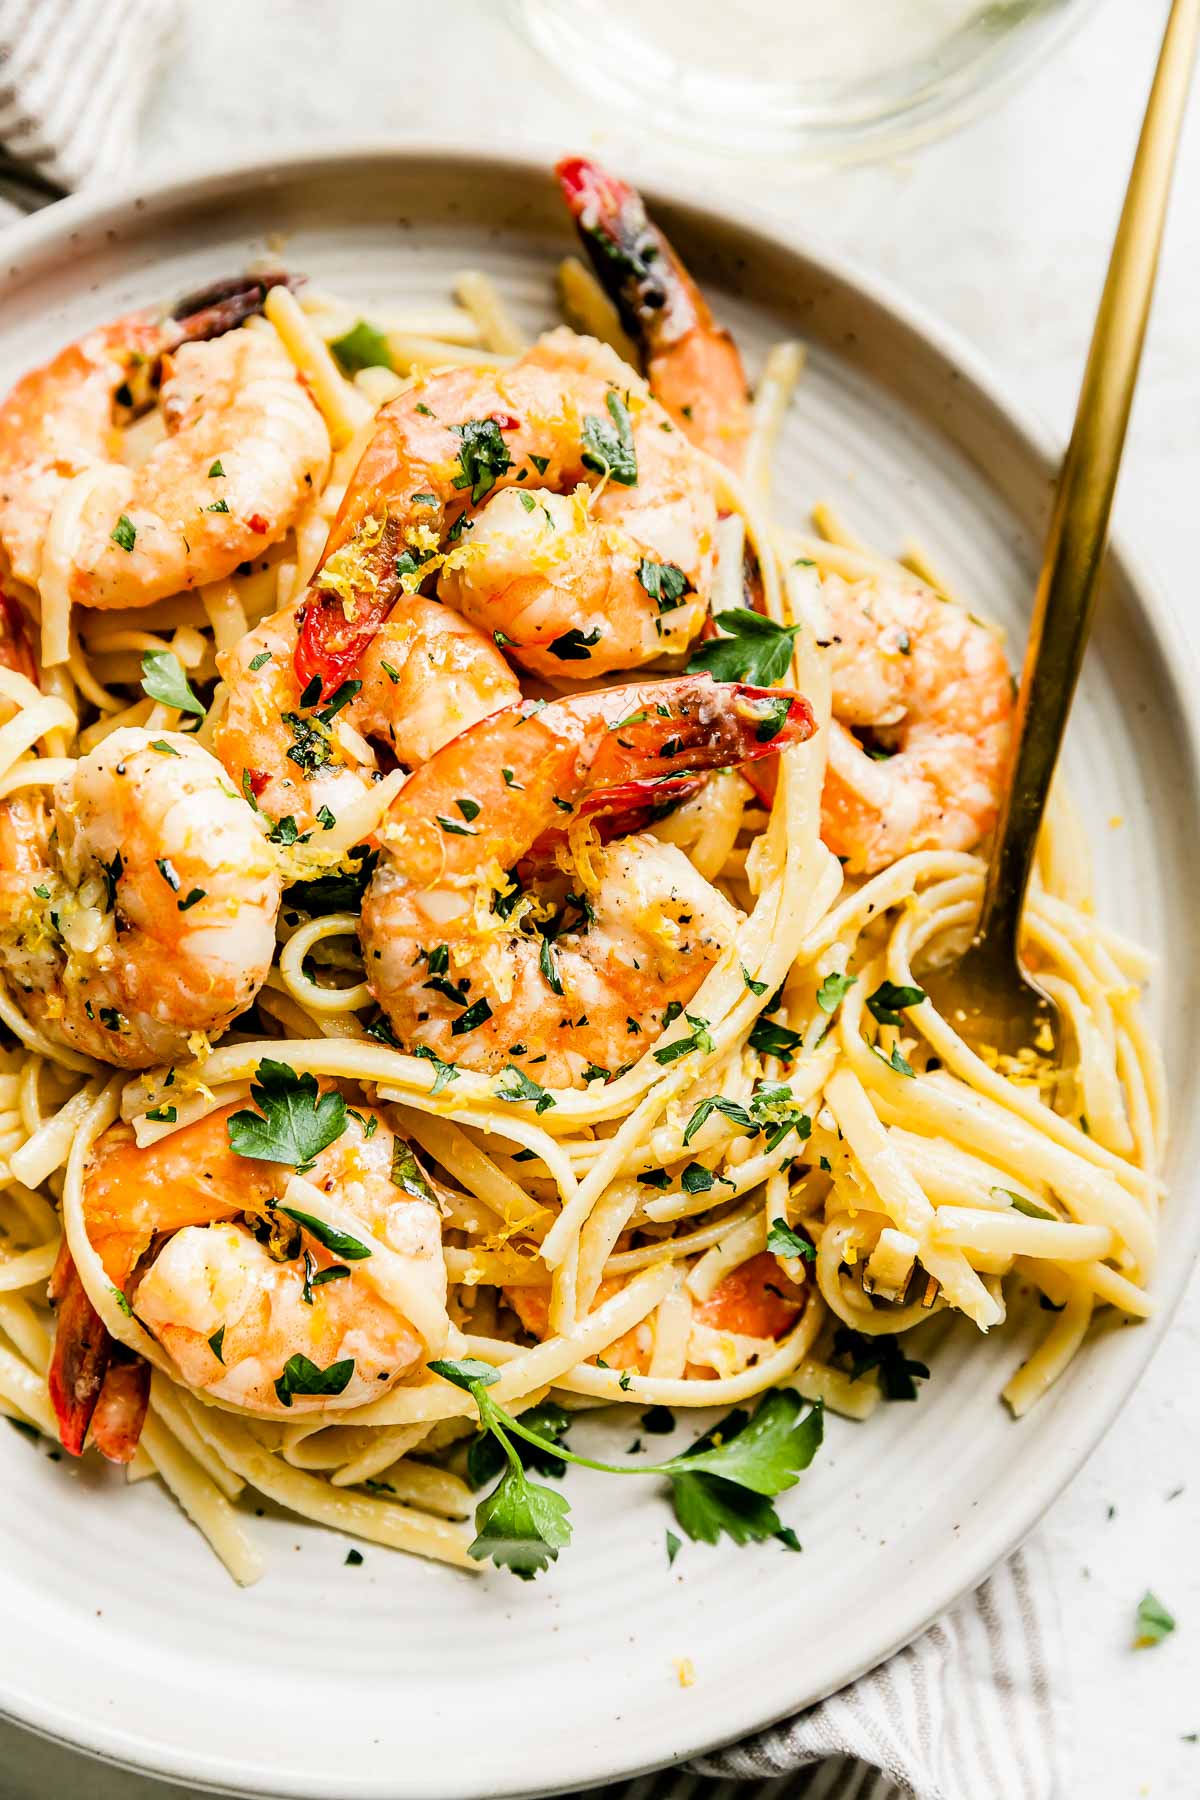 Baked shrimp scampi pasta is served atop a ceramic dinner plate that rests atop a creamy white textured surface. A cream and white striped napkin rests underneath the plate with a gold fork resting atop the plate. A glass of white wine is served alongside the plate of pasta.